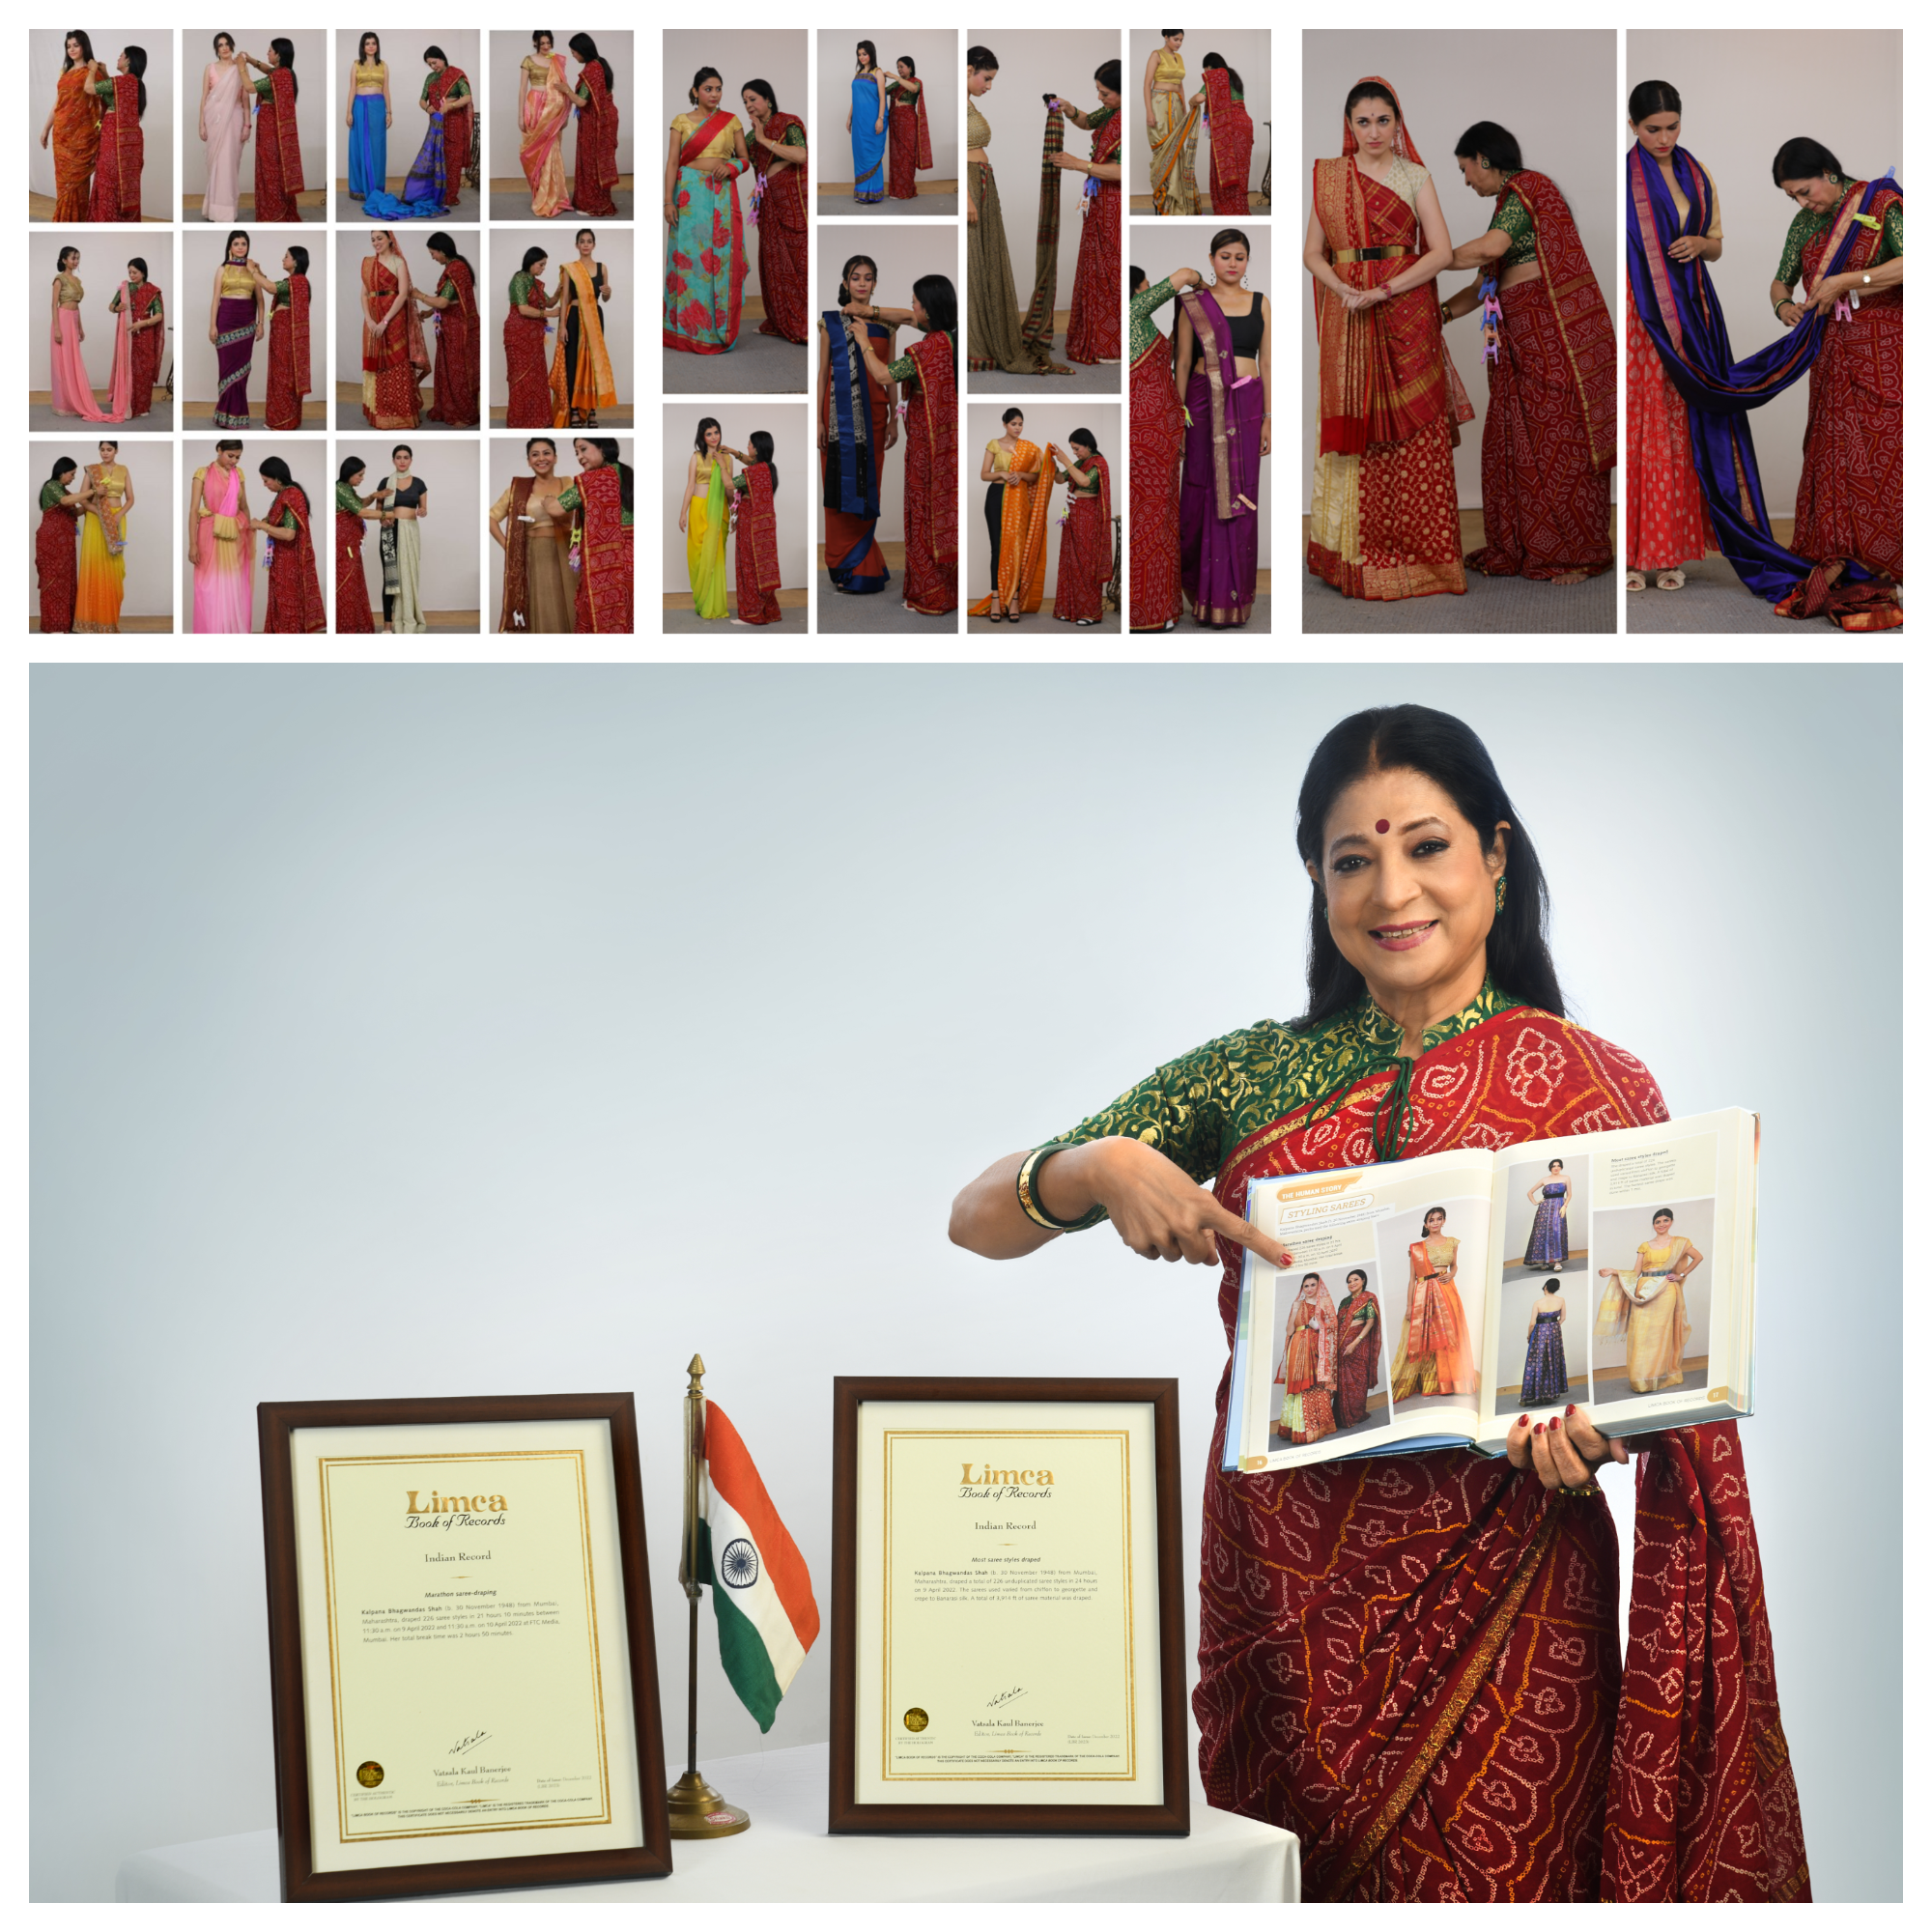 Kalpana Shah with Limca Book Certificates and Photos of her Performance